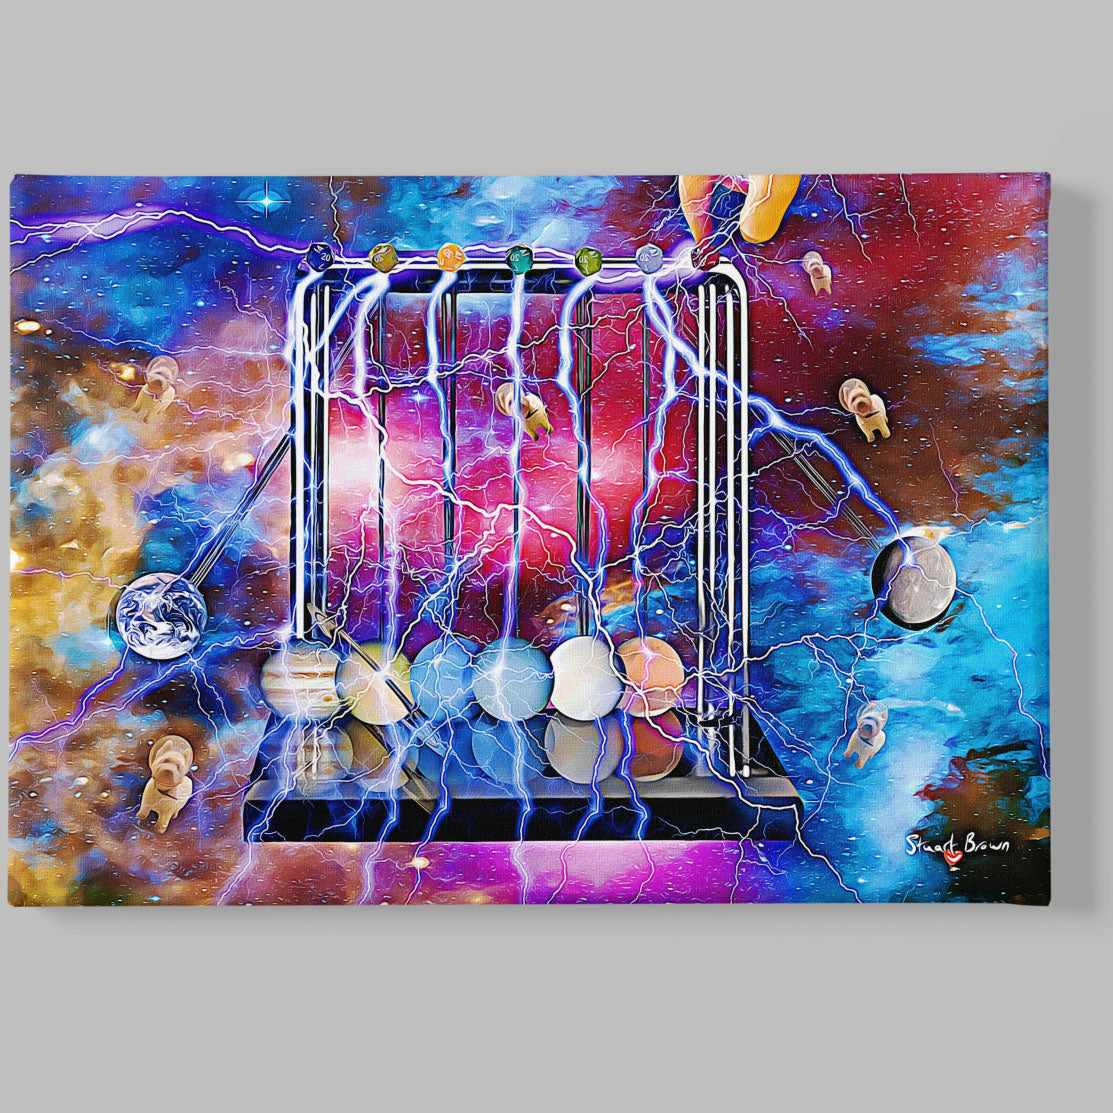 god plays dice with the universe wall art print